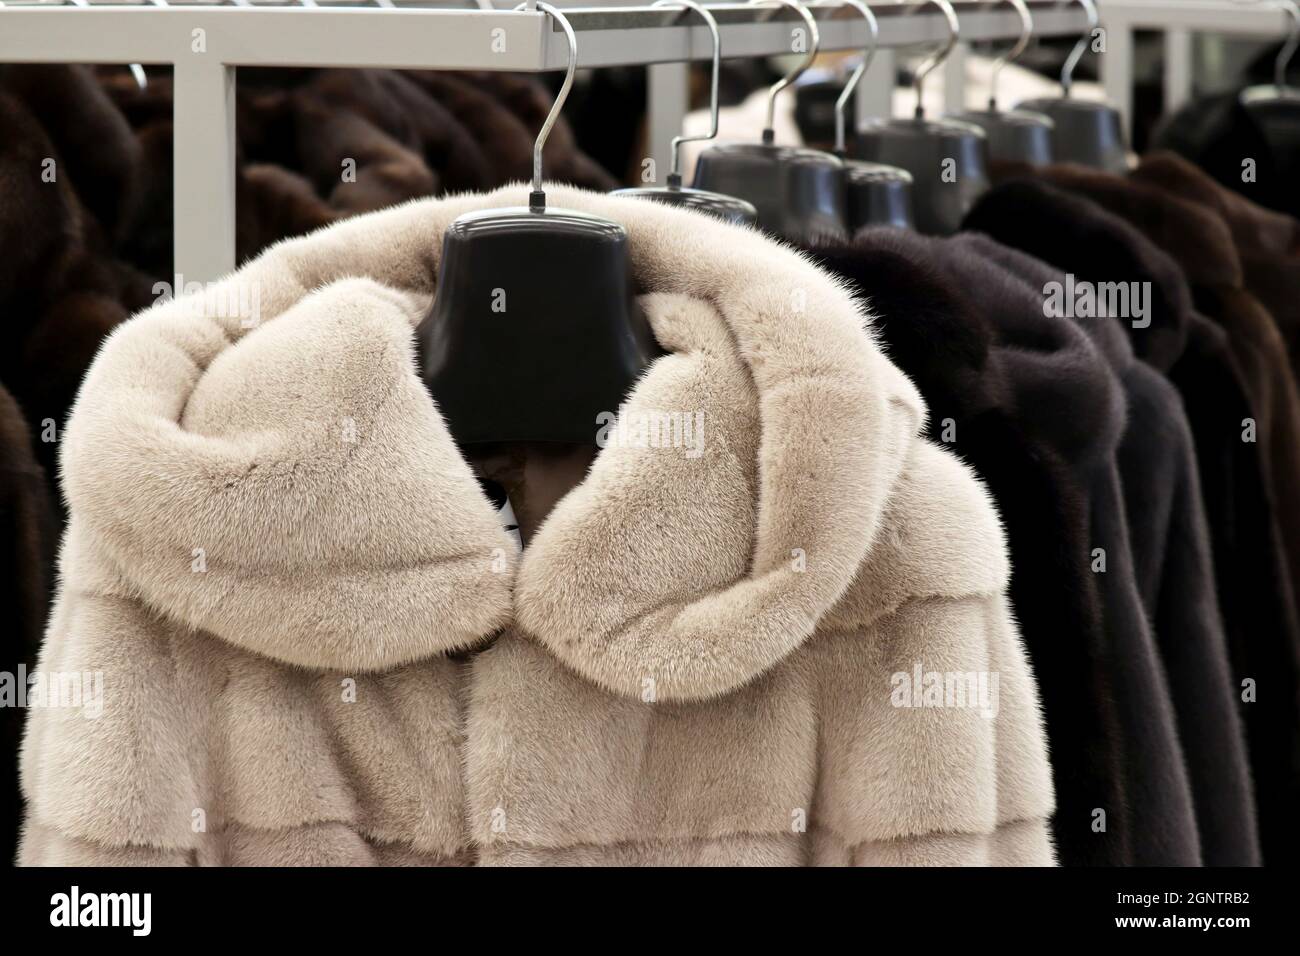 Fur coats in a row on a hanger in the store. Female fashion, natural fur clothes in sale Stock Photo